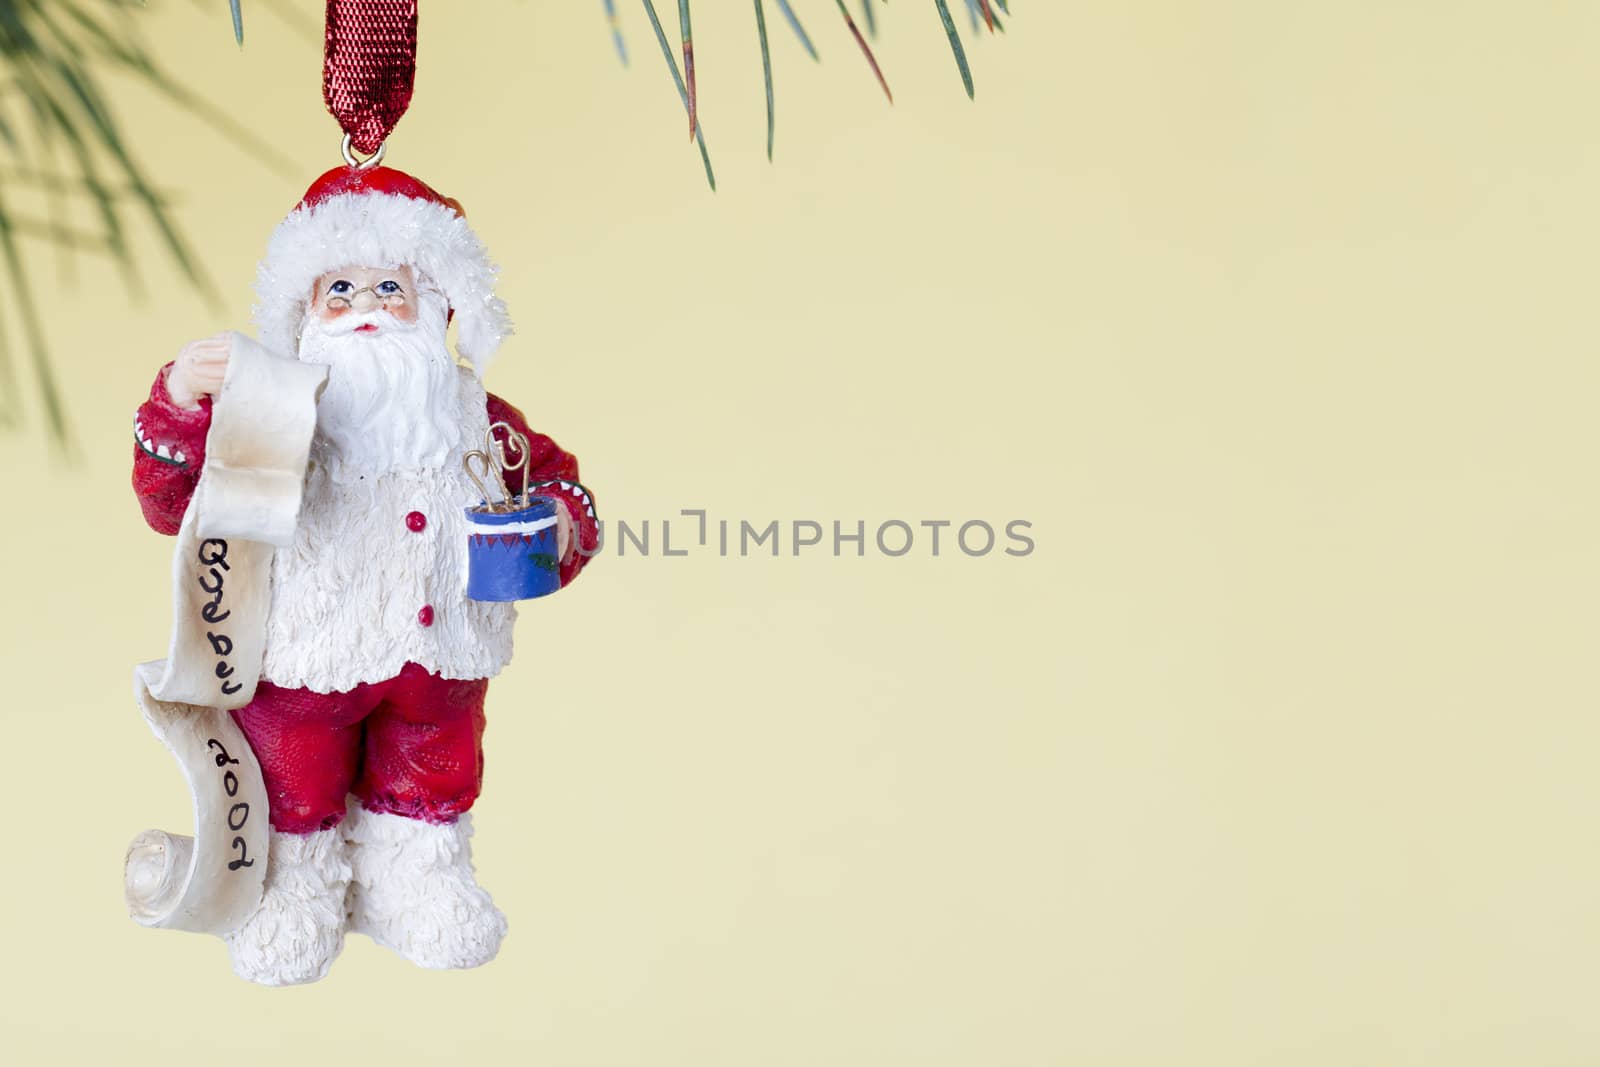 Santa Christmas bauble hanging on Christmas tree against yellow background.